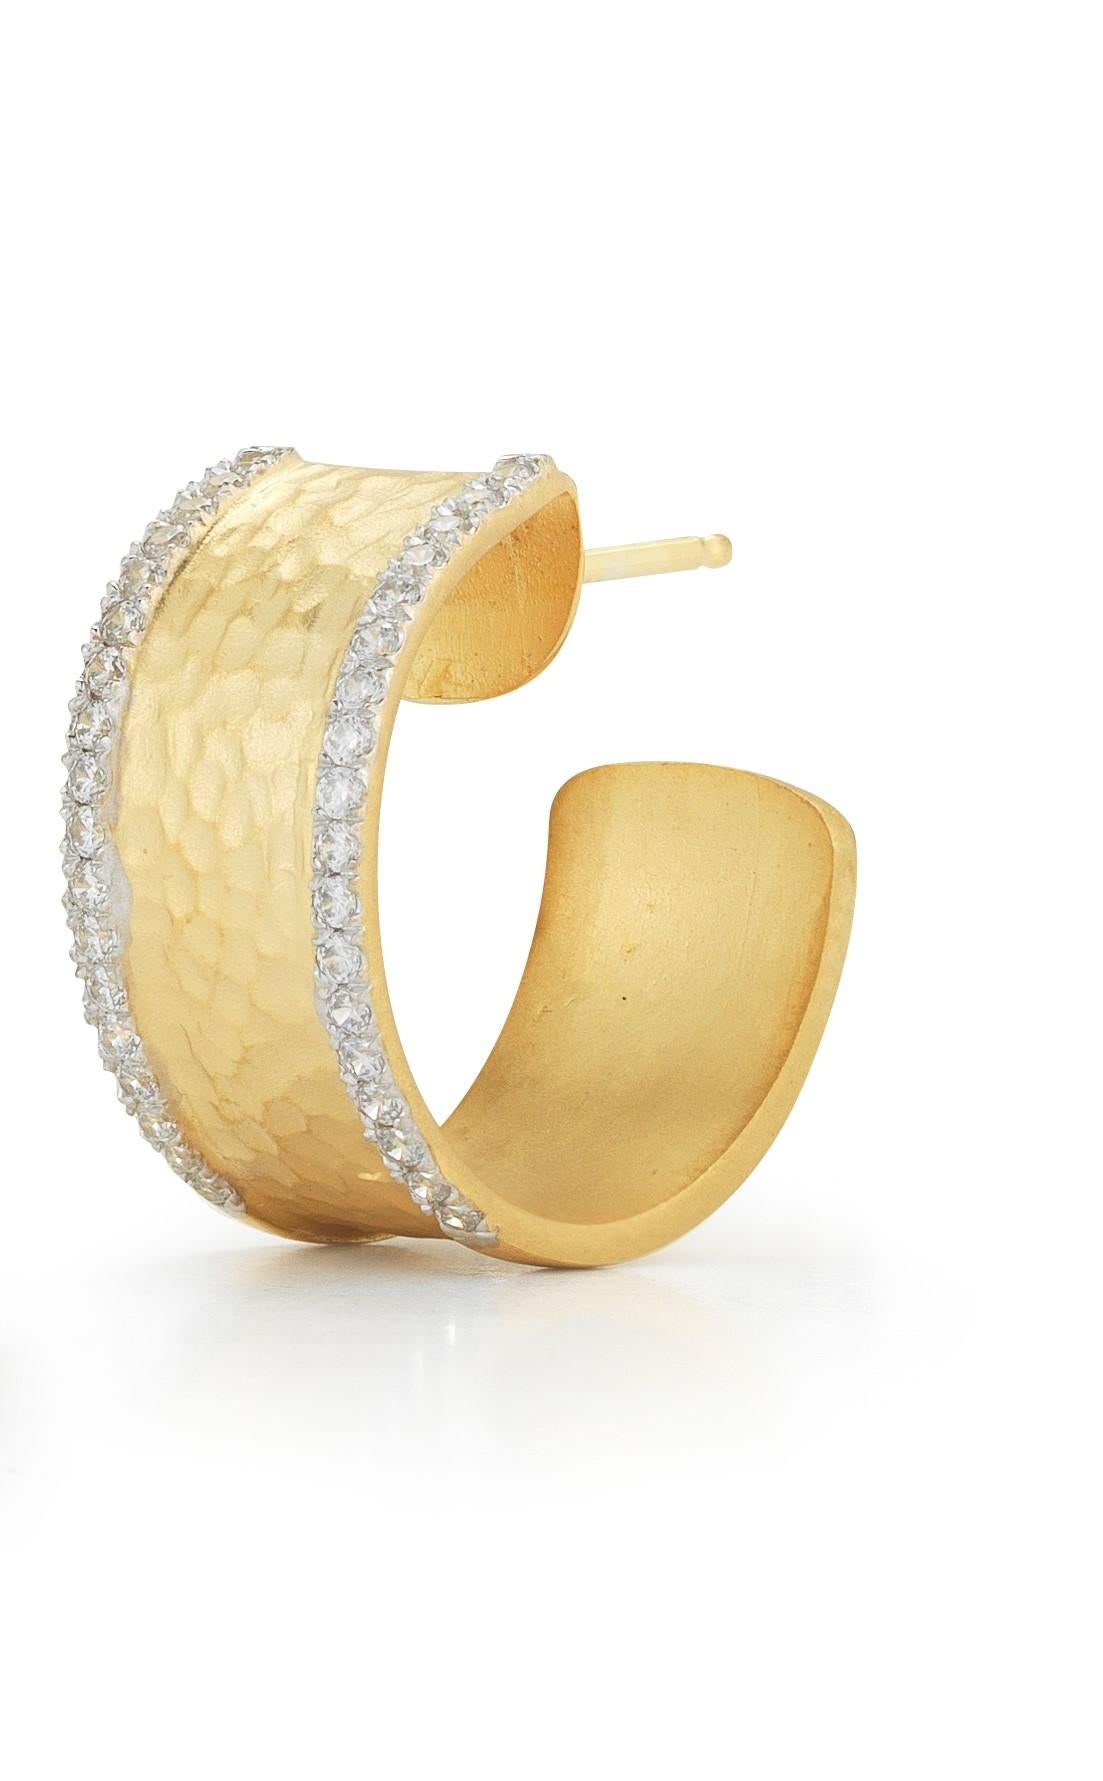 14 Karat Yellow Gold Hand-Crafted Matte And Hammer-Finished Hoop Earrings, Set With 0.43 Carats Of Pave Set Diamonds on a Post.
